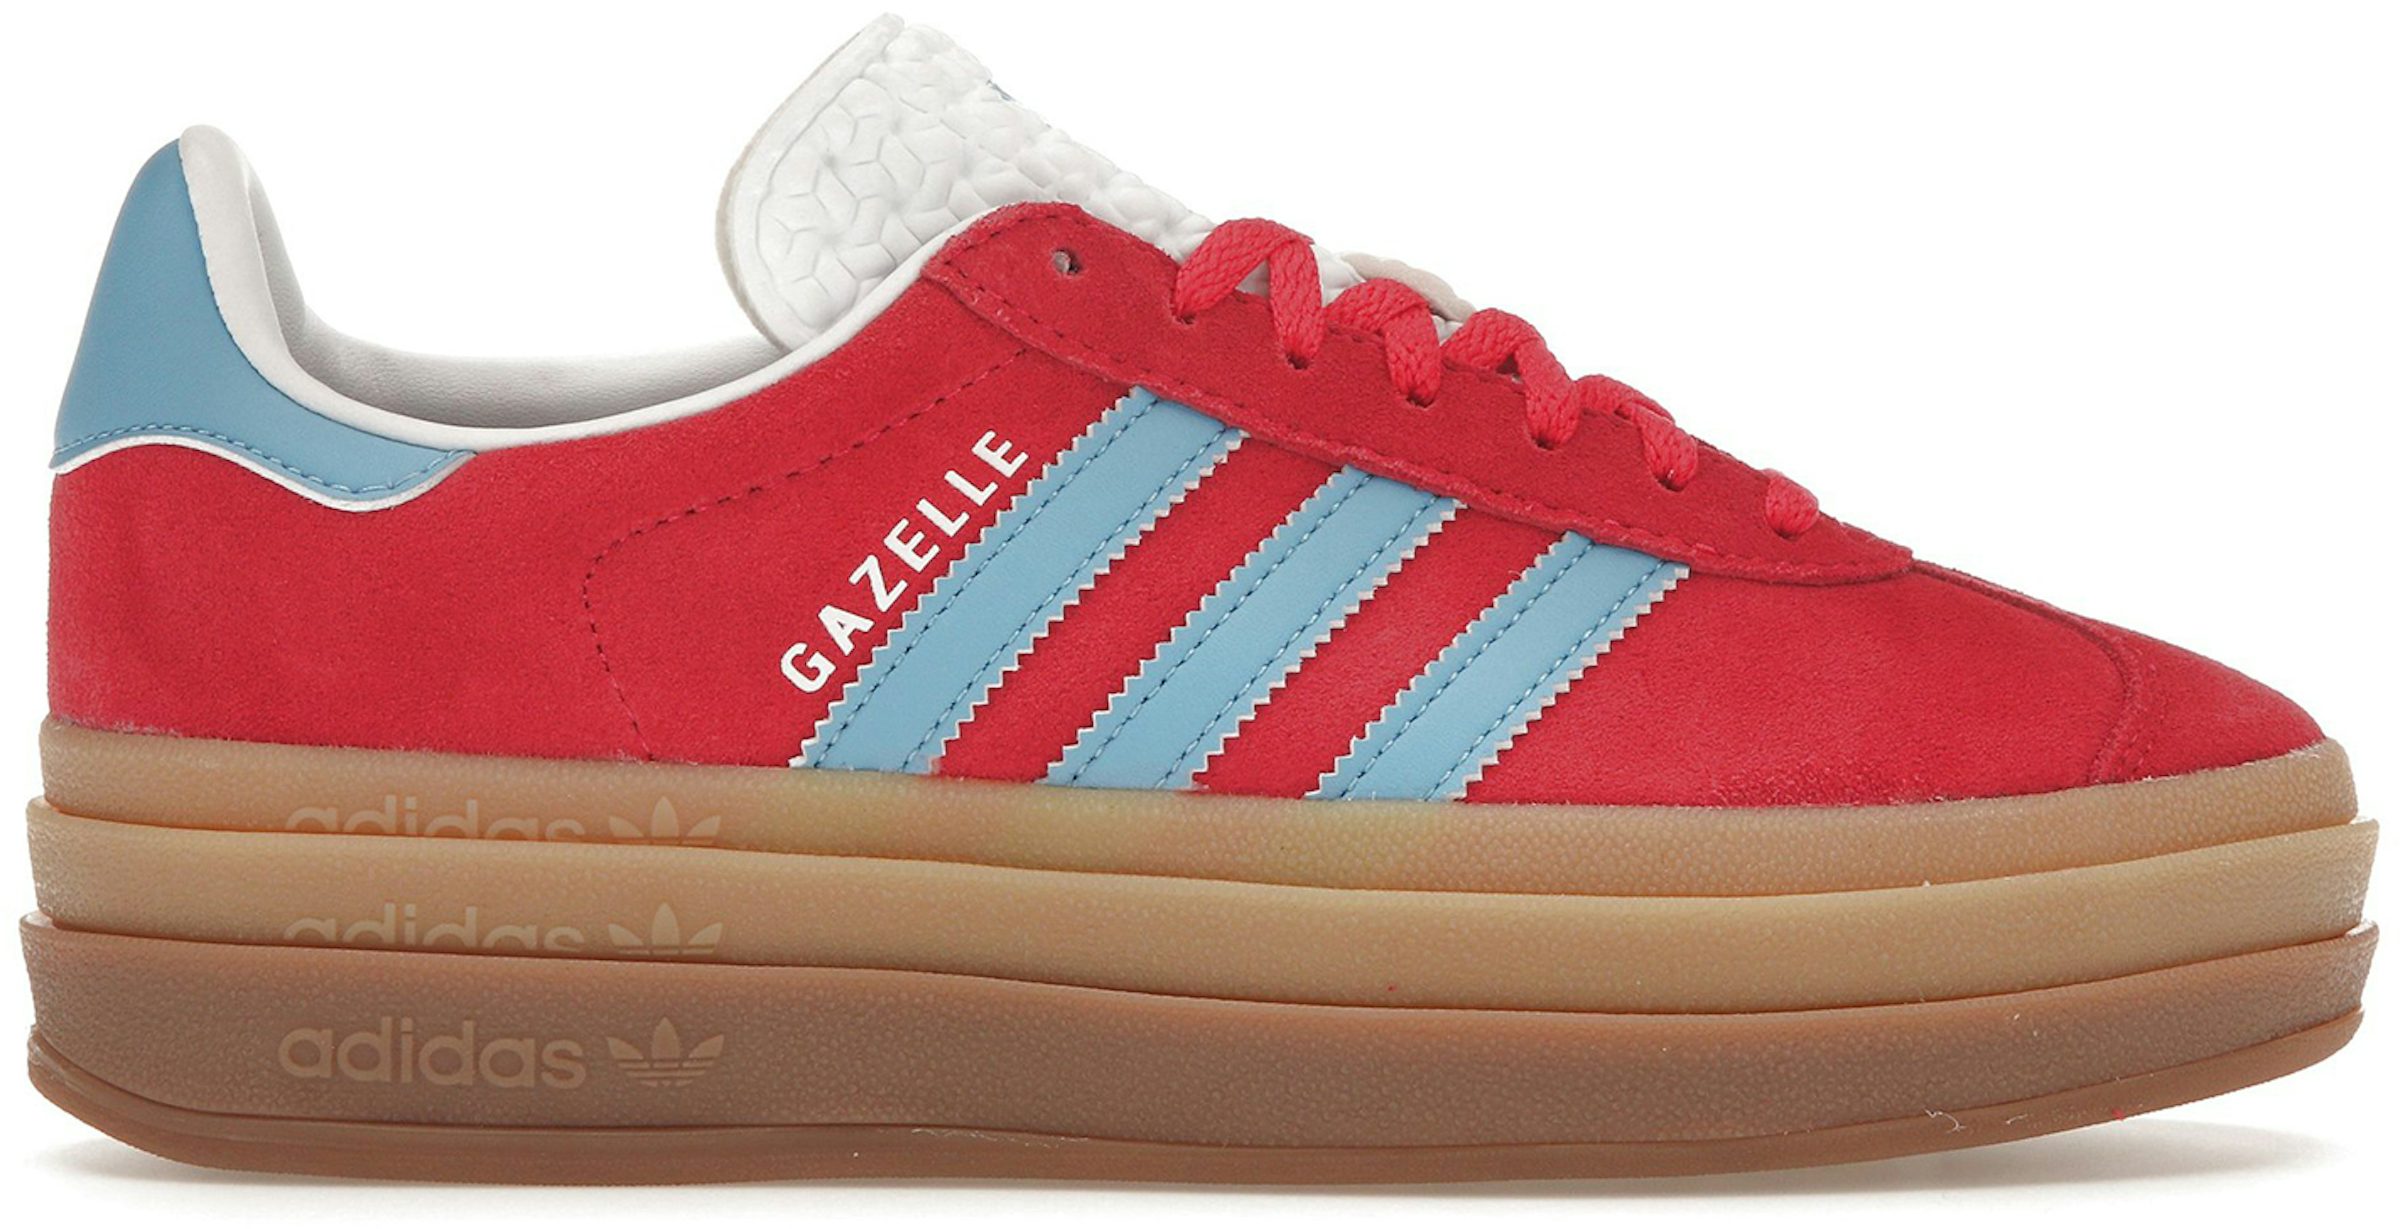 StockX New Sneakers - Buy & adidas Gazelle Shoes